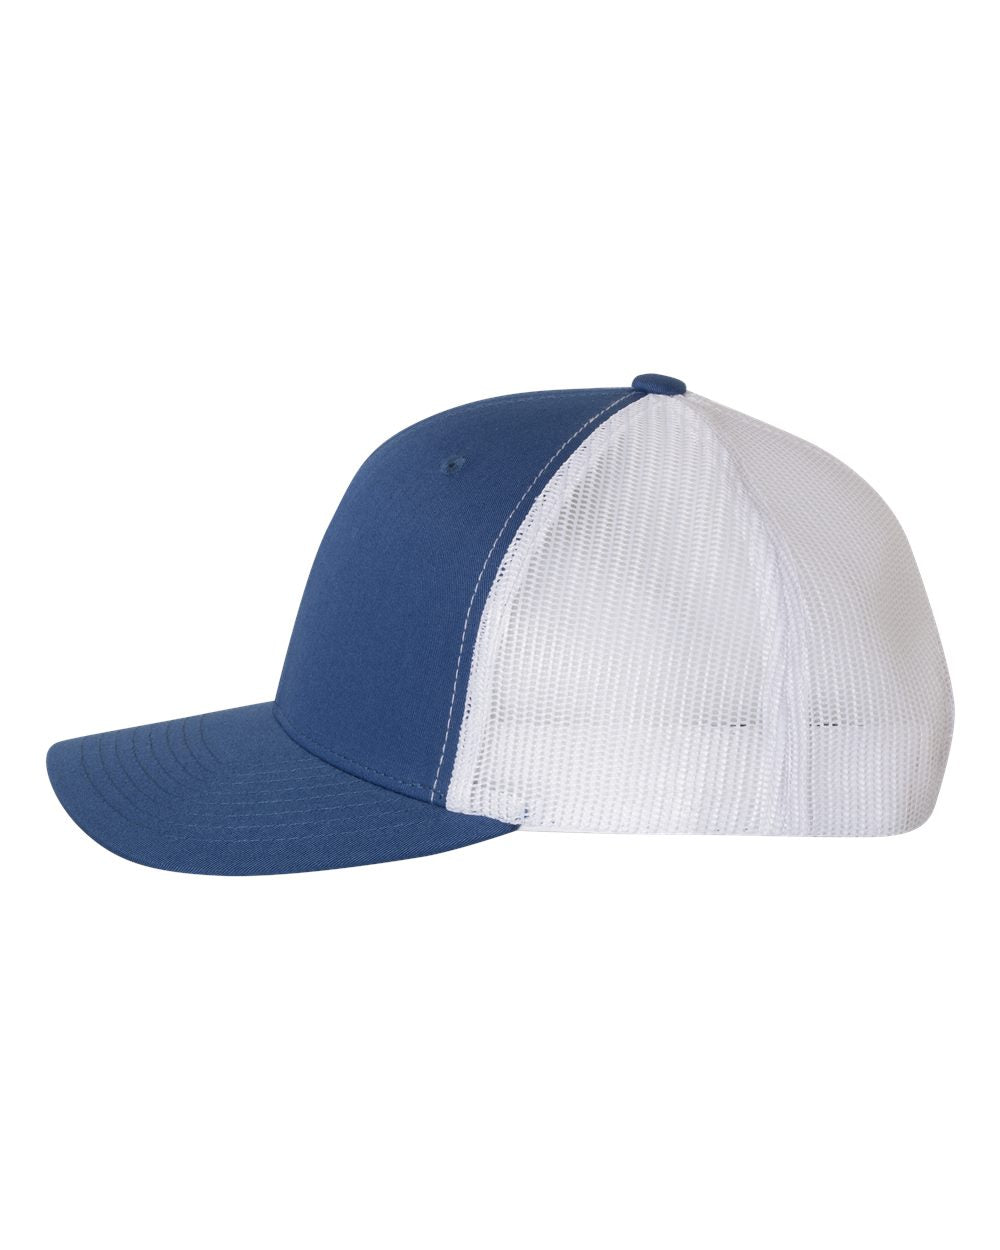 Swag Trucker Hat - Royal with White Mesh